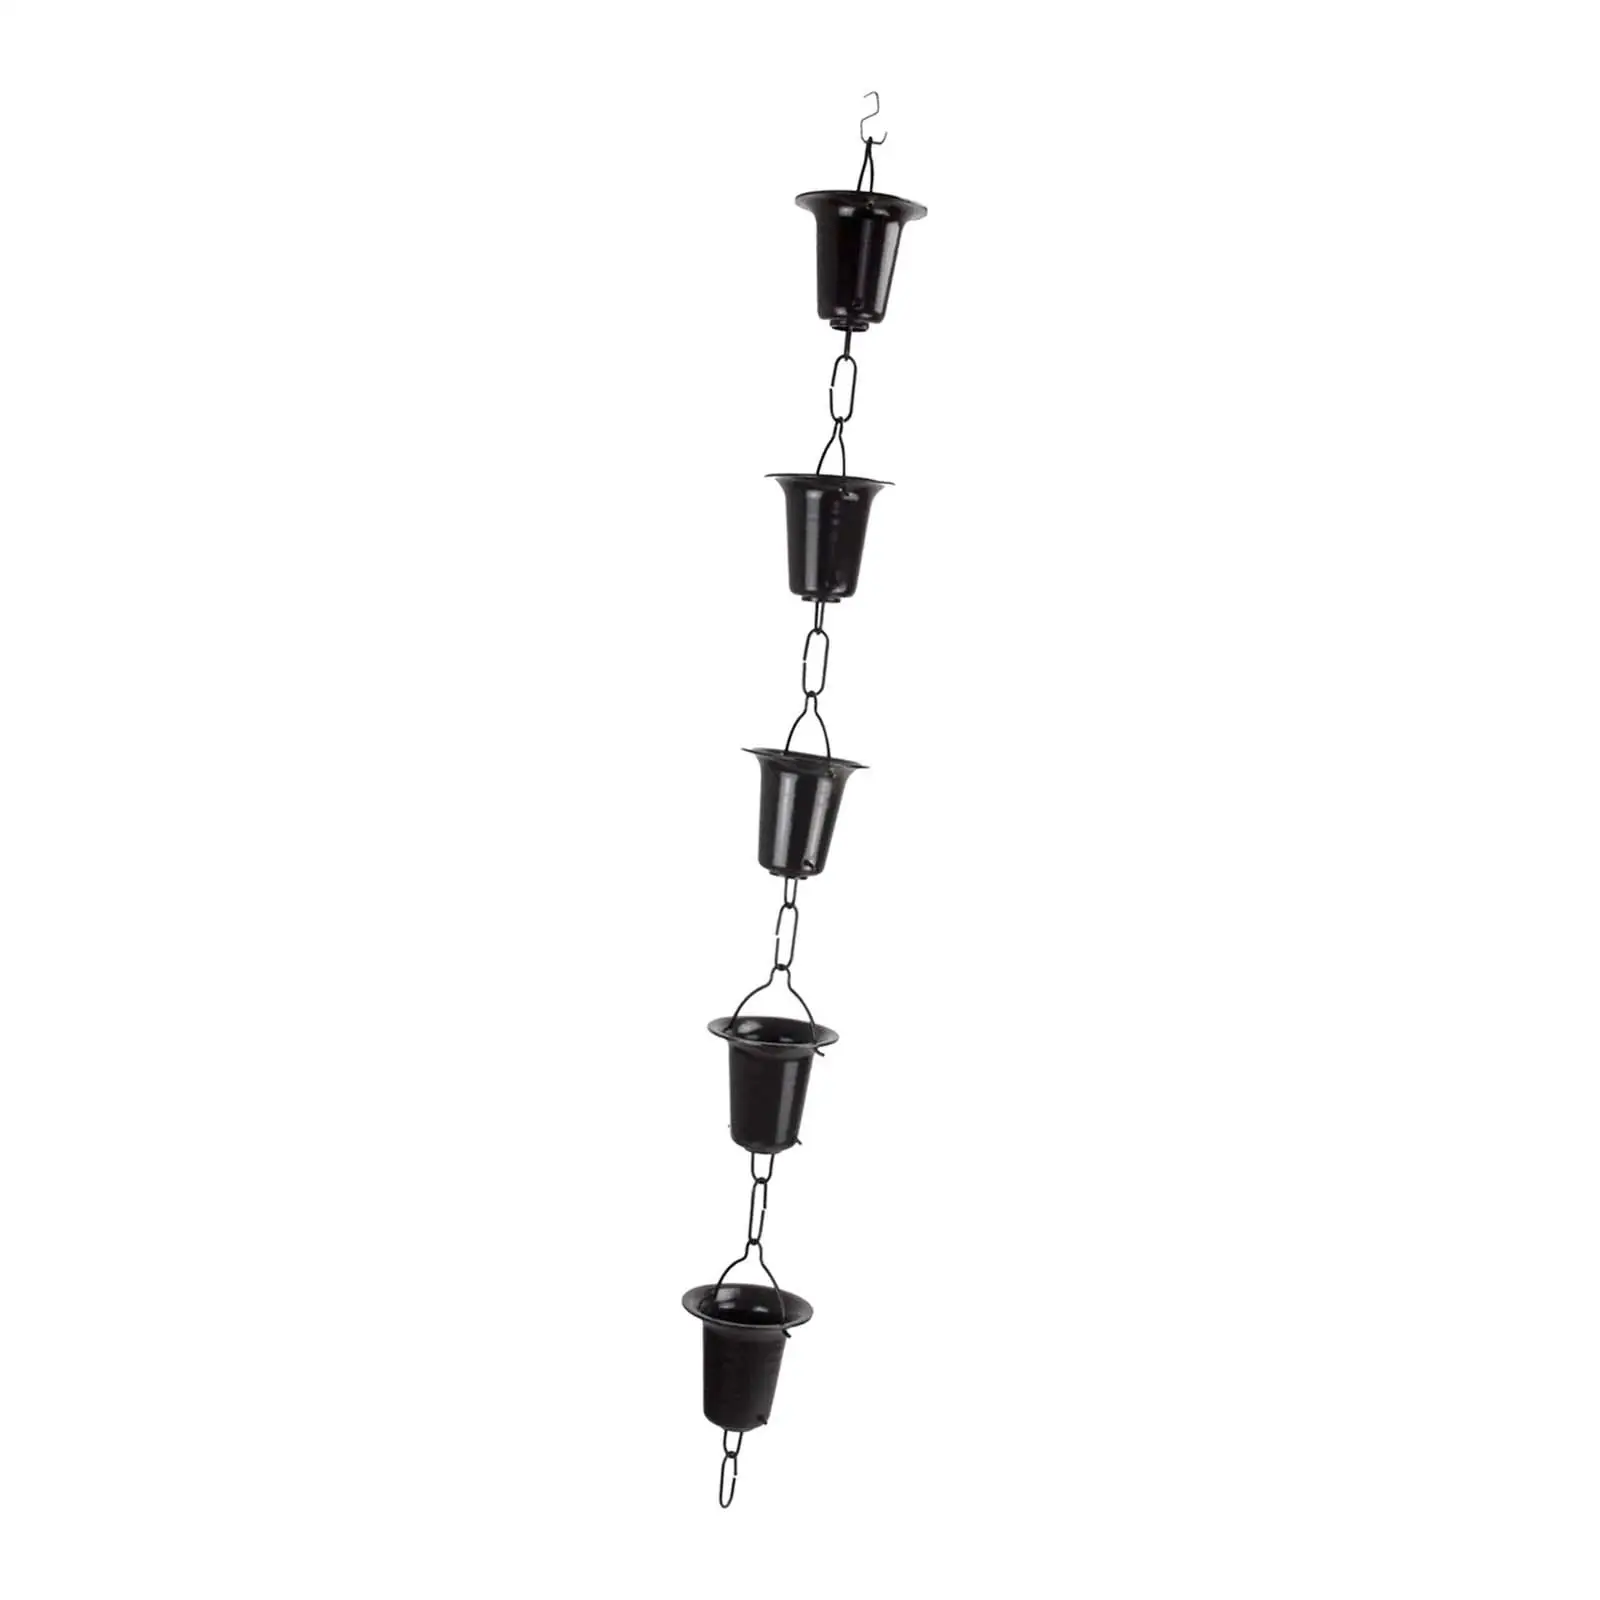 Garden Rain Chains Display 1M Replacement Downspouts for Home Sheds Outdoor